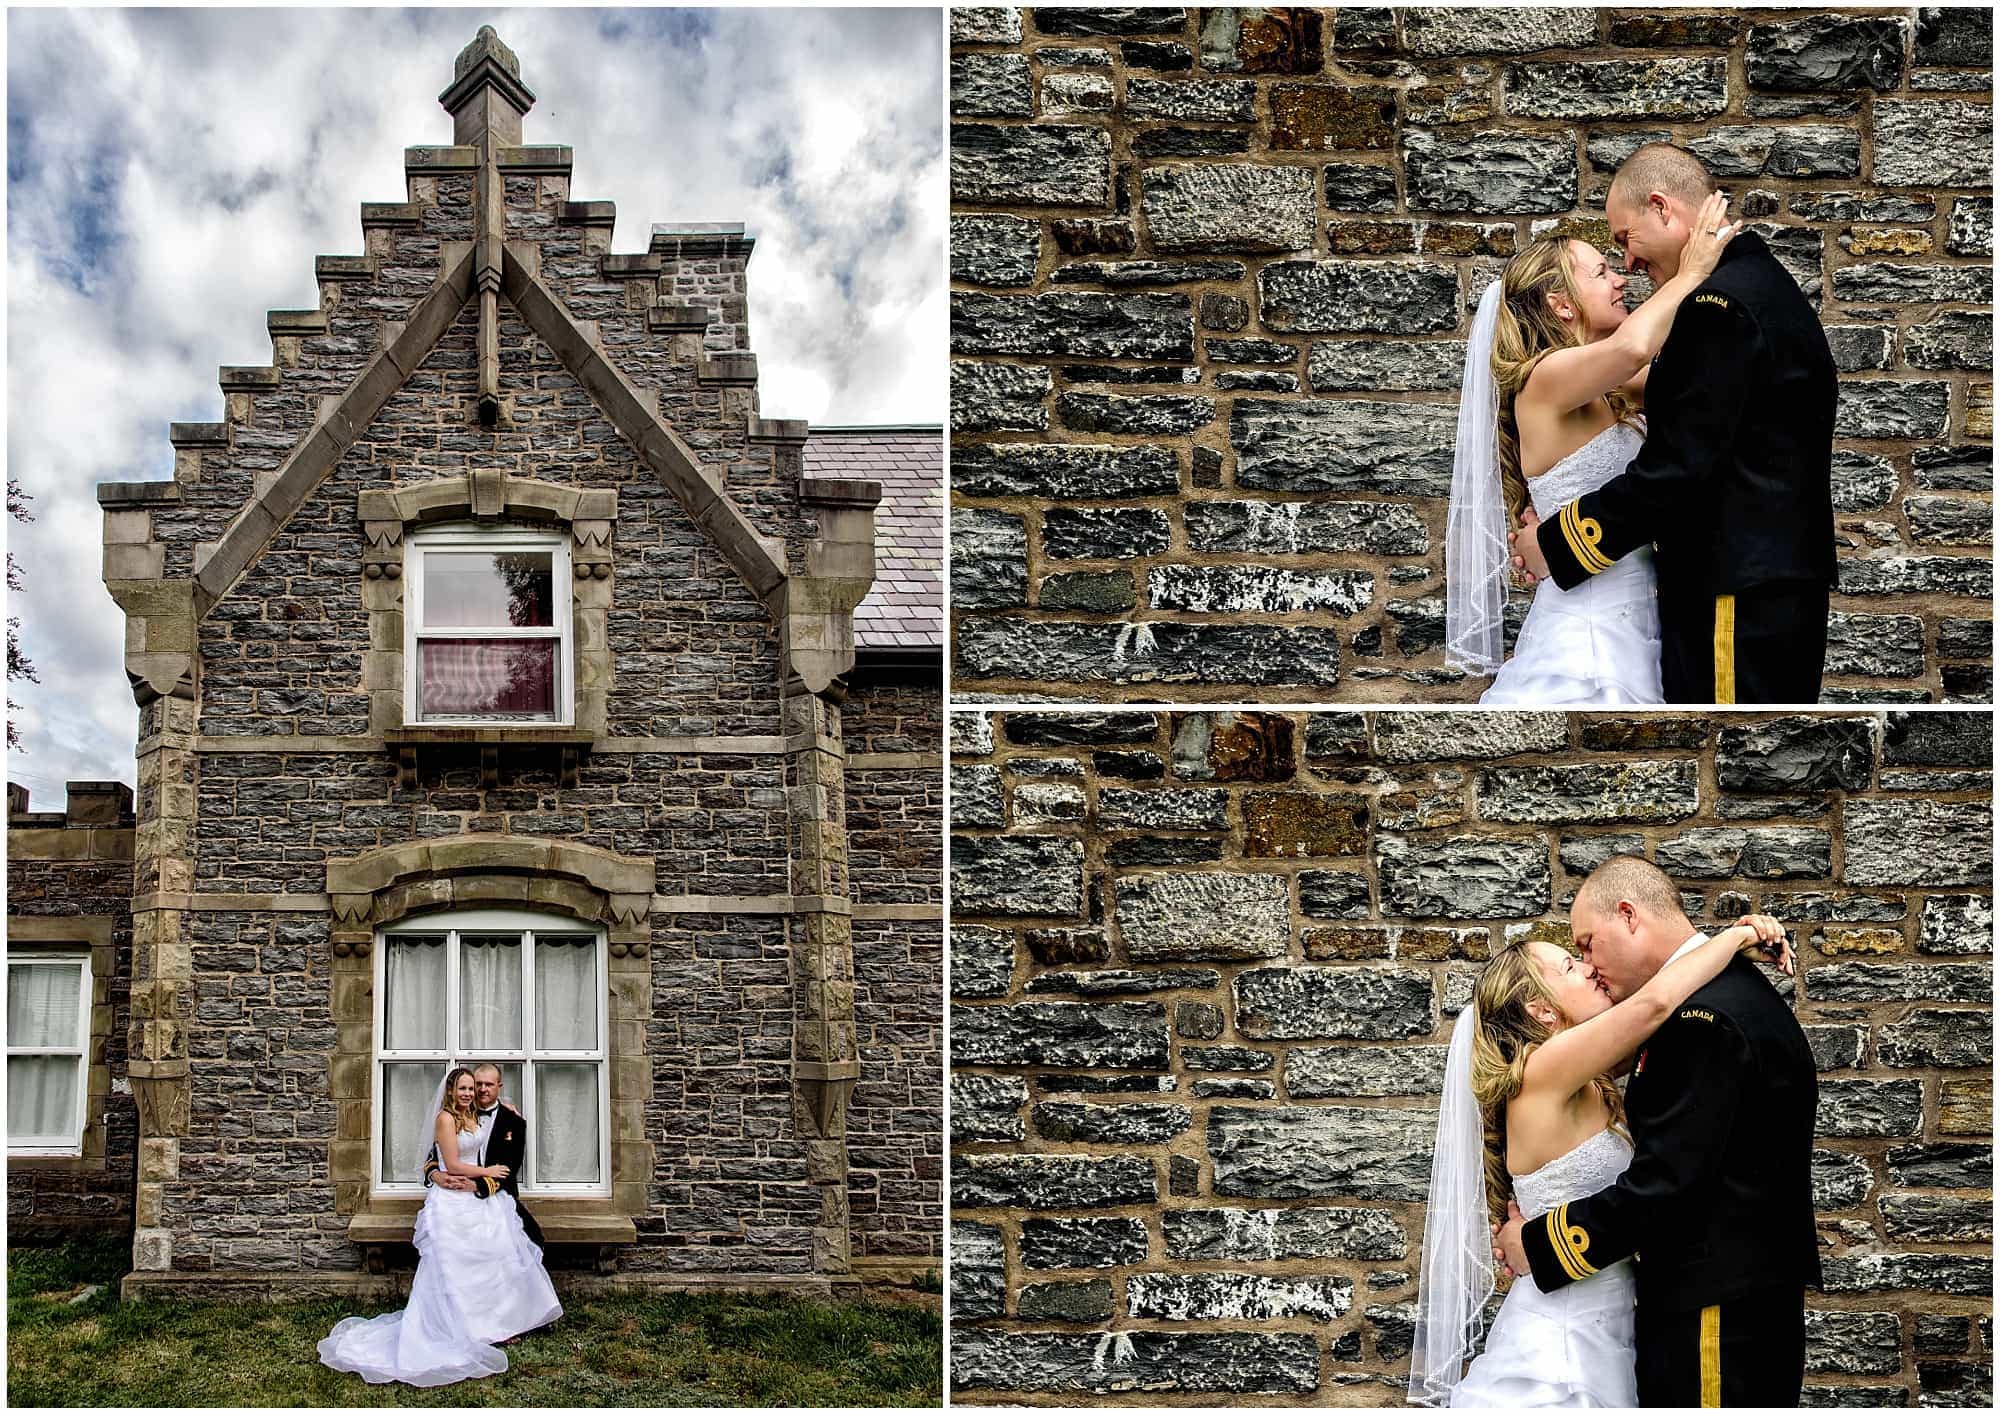 The bride and groom posing for wedding photos at the Gatehouse in Point Pleasant Park Halifax, NS.